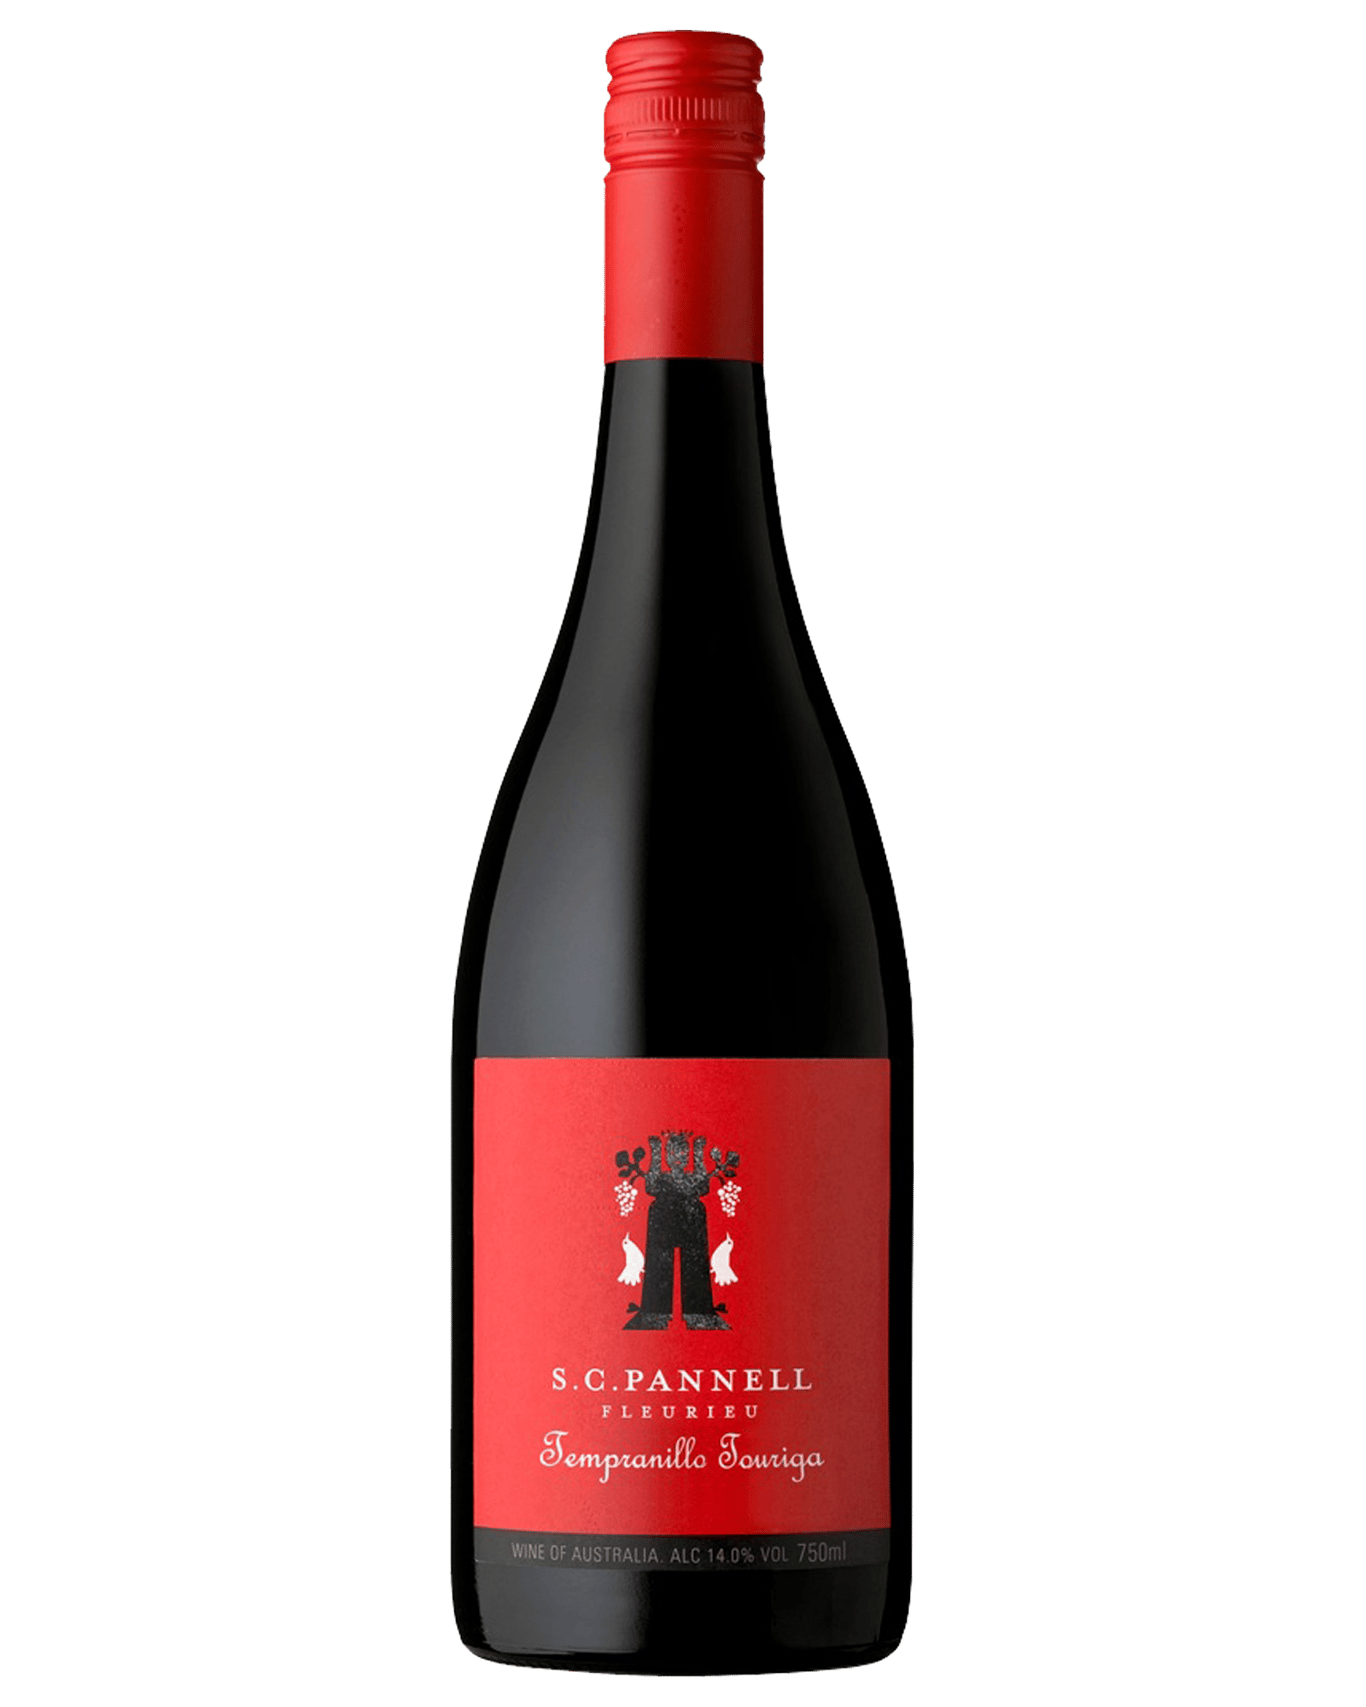 S C Pannell Tempranillo Tourig